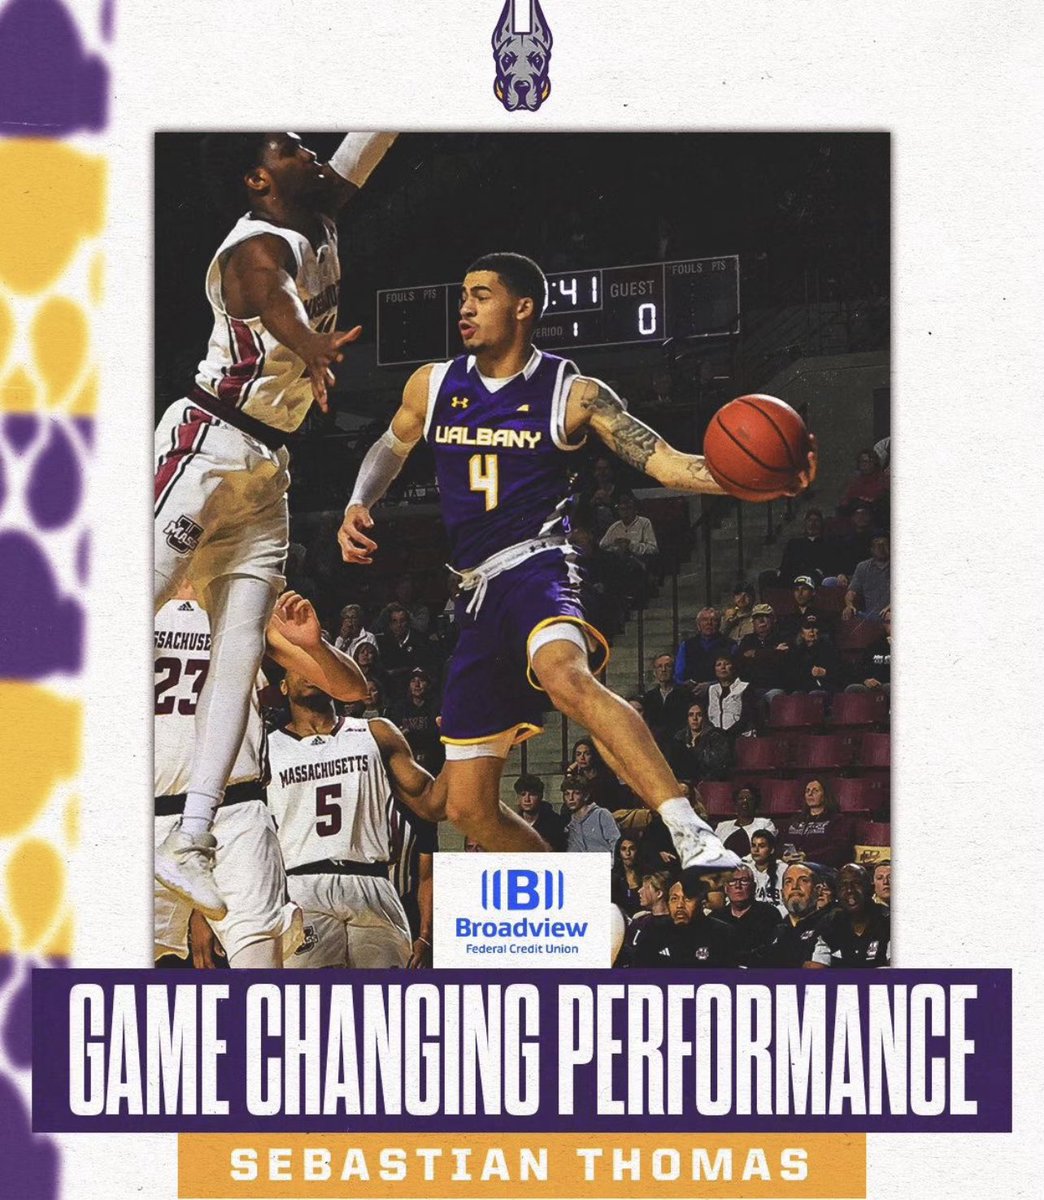 #RIEliteAlumni Sebastian Thomas @bassyyyyy4 exploded for 24 pts 7 rebounds and 5 assists in a win for @UAlbanyMBB ! In case you forgot bassy been that dude! #RIEliteFam